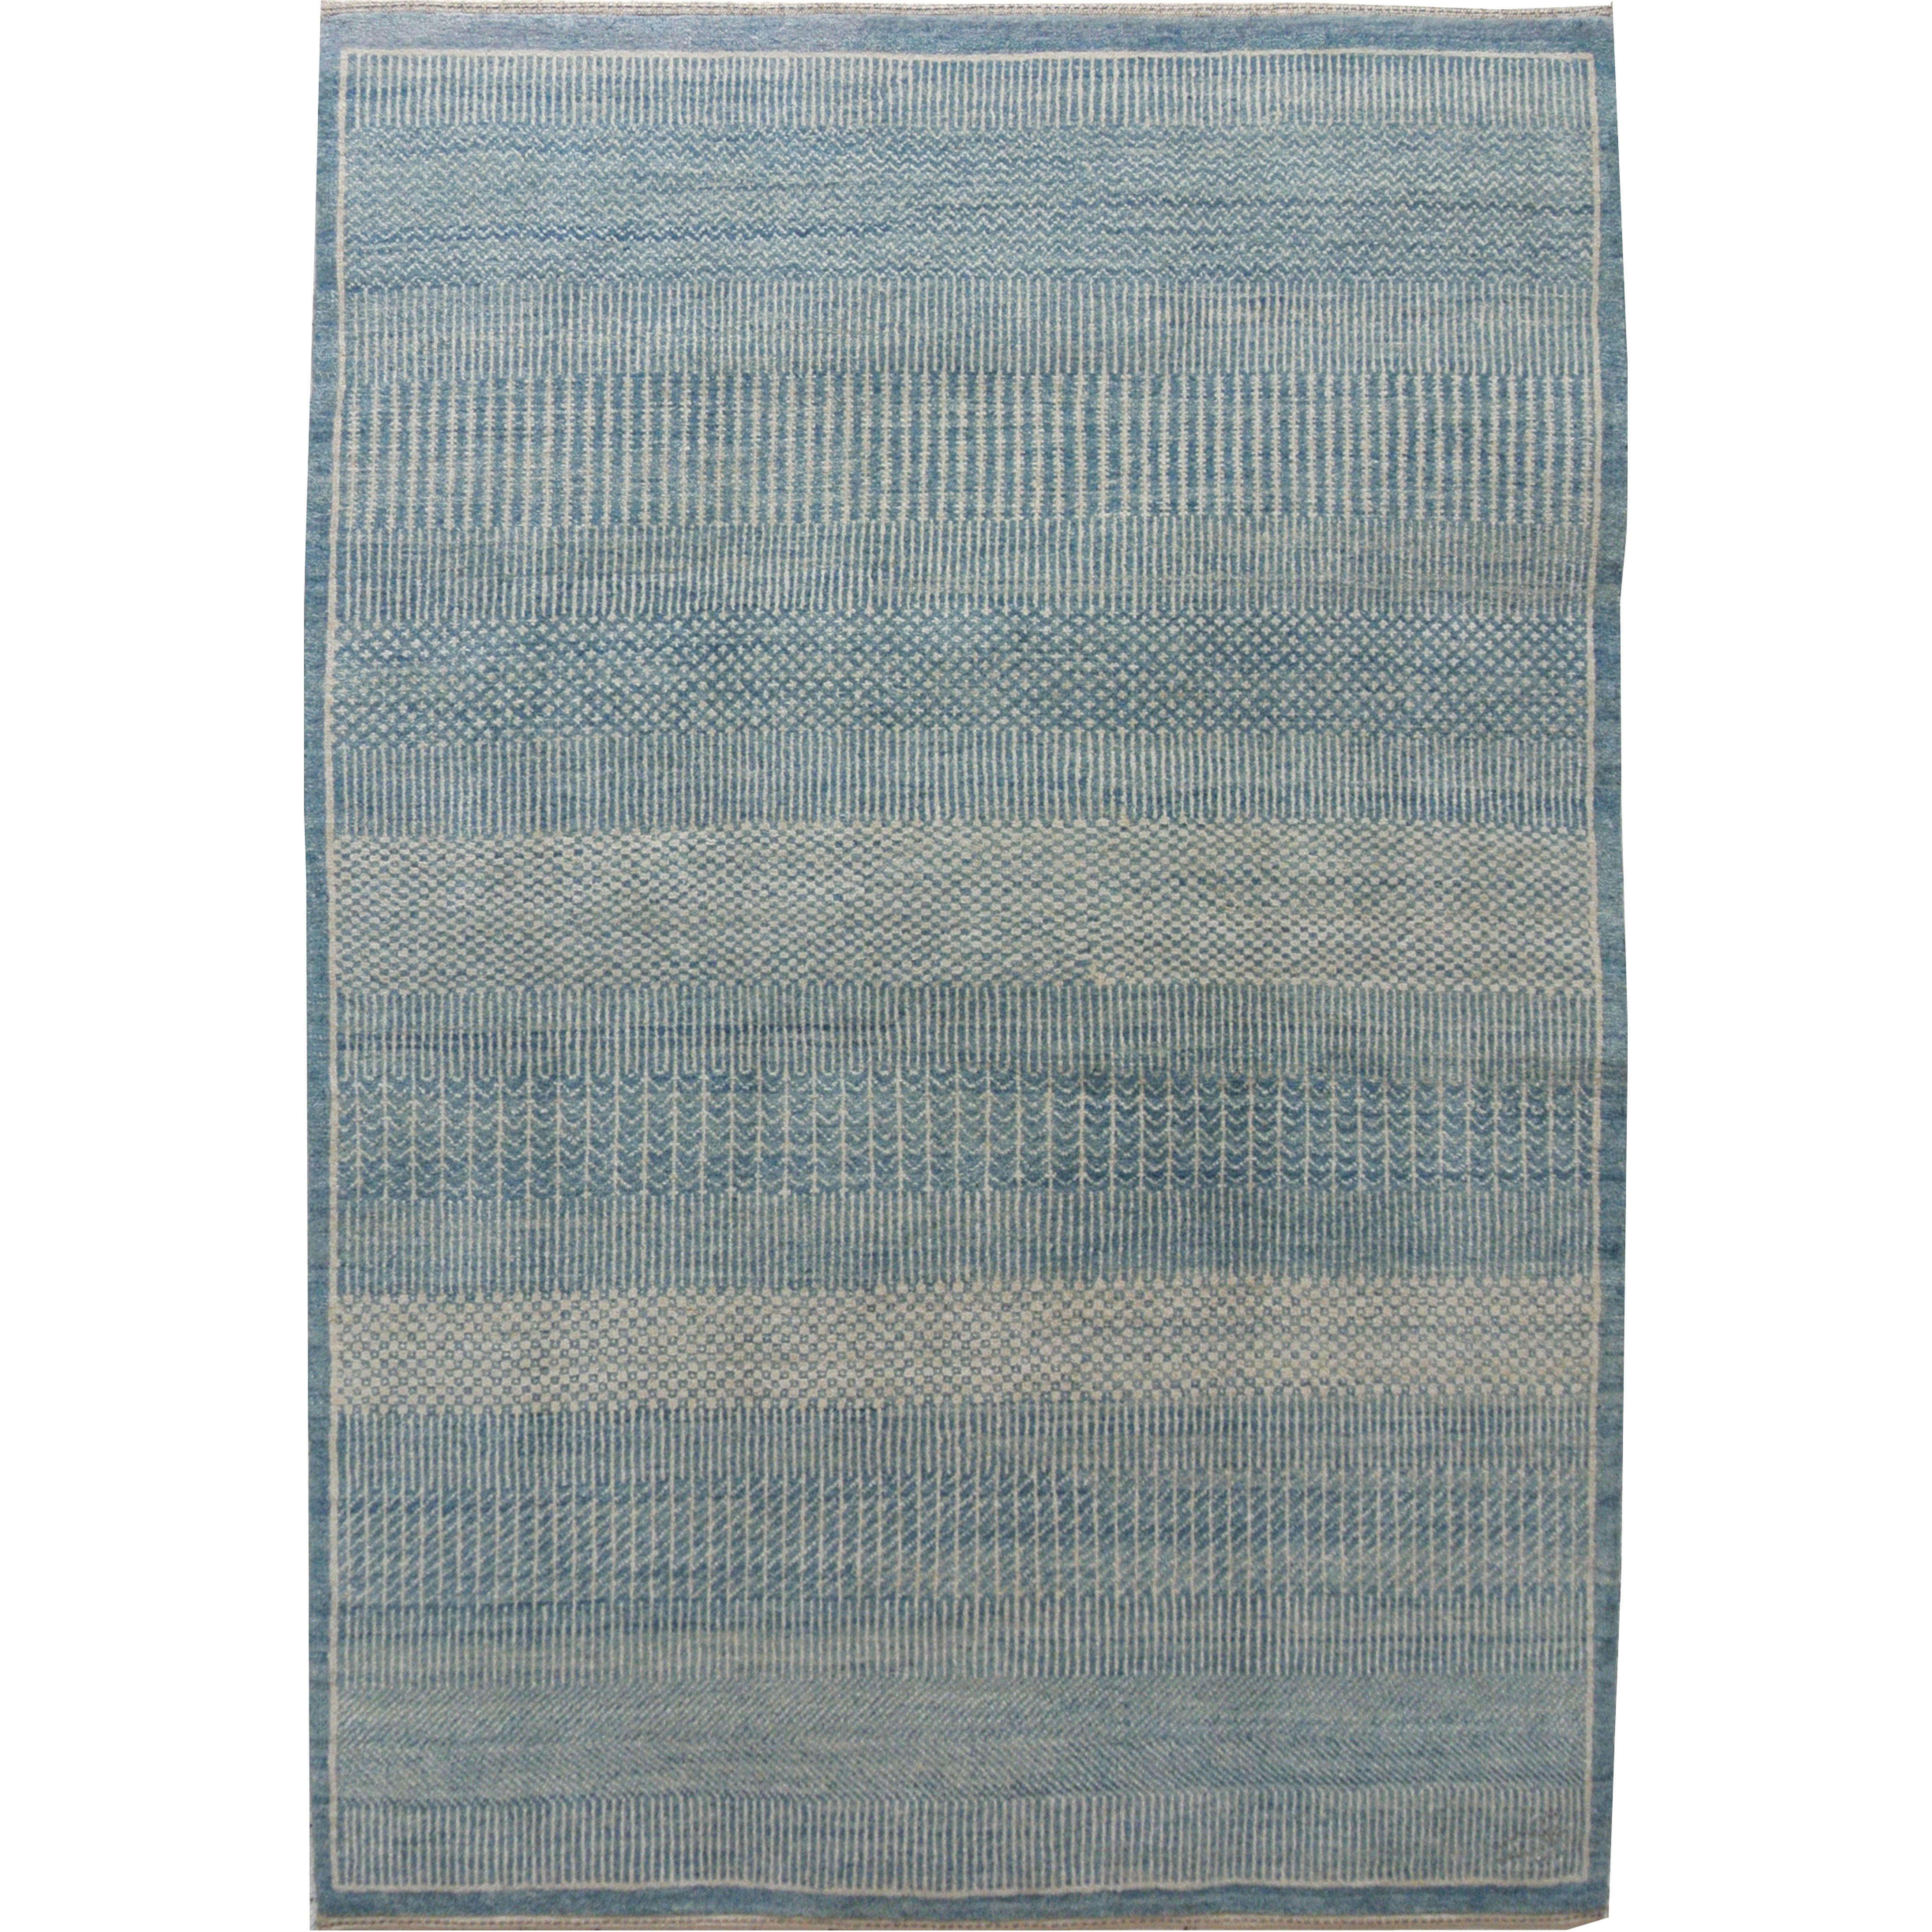 Contemporary Wool Persian Rug, Blue and Cream, Orley Shabahang, 5' x 7'